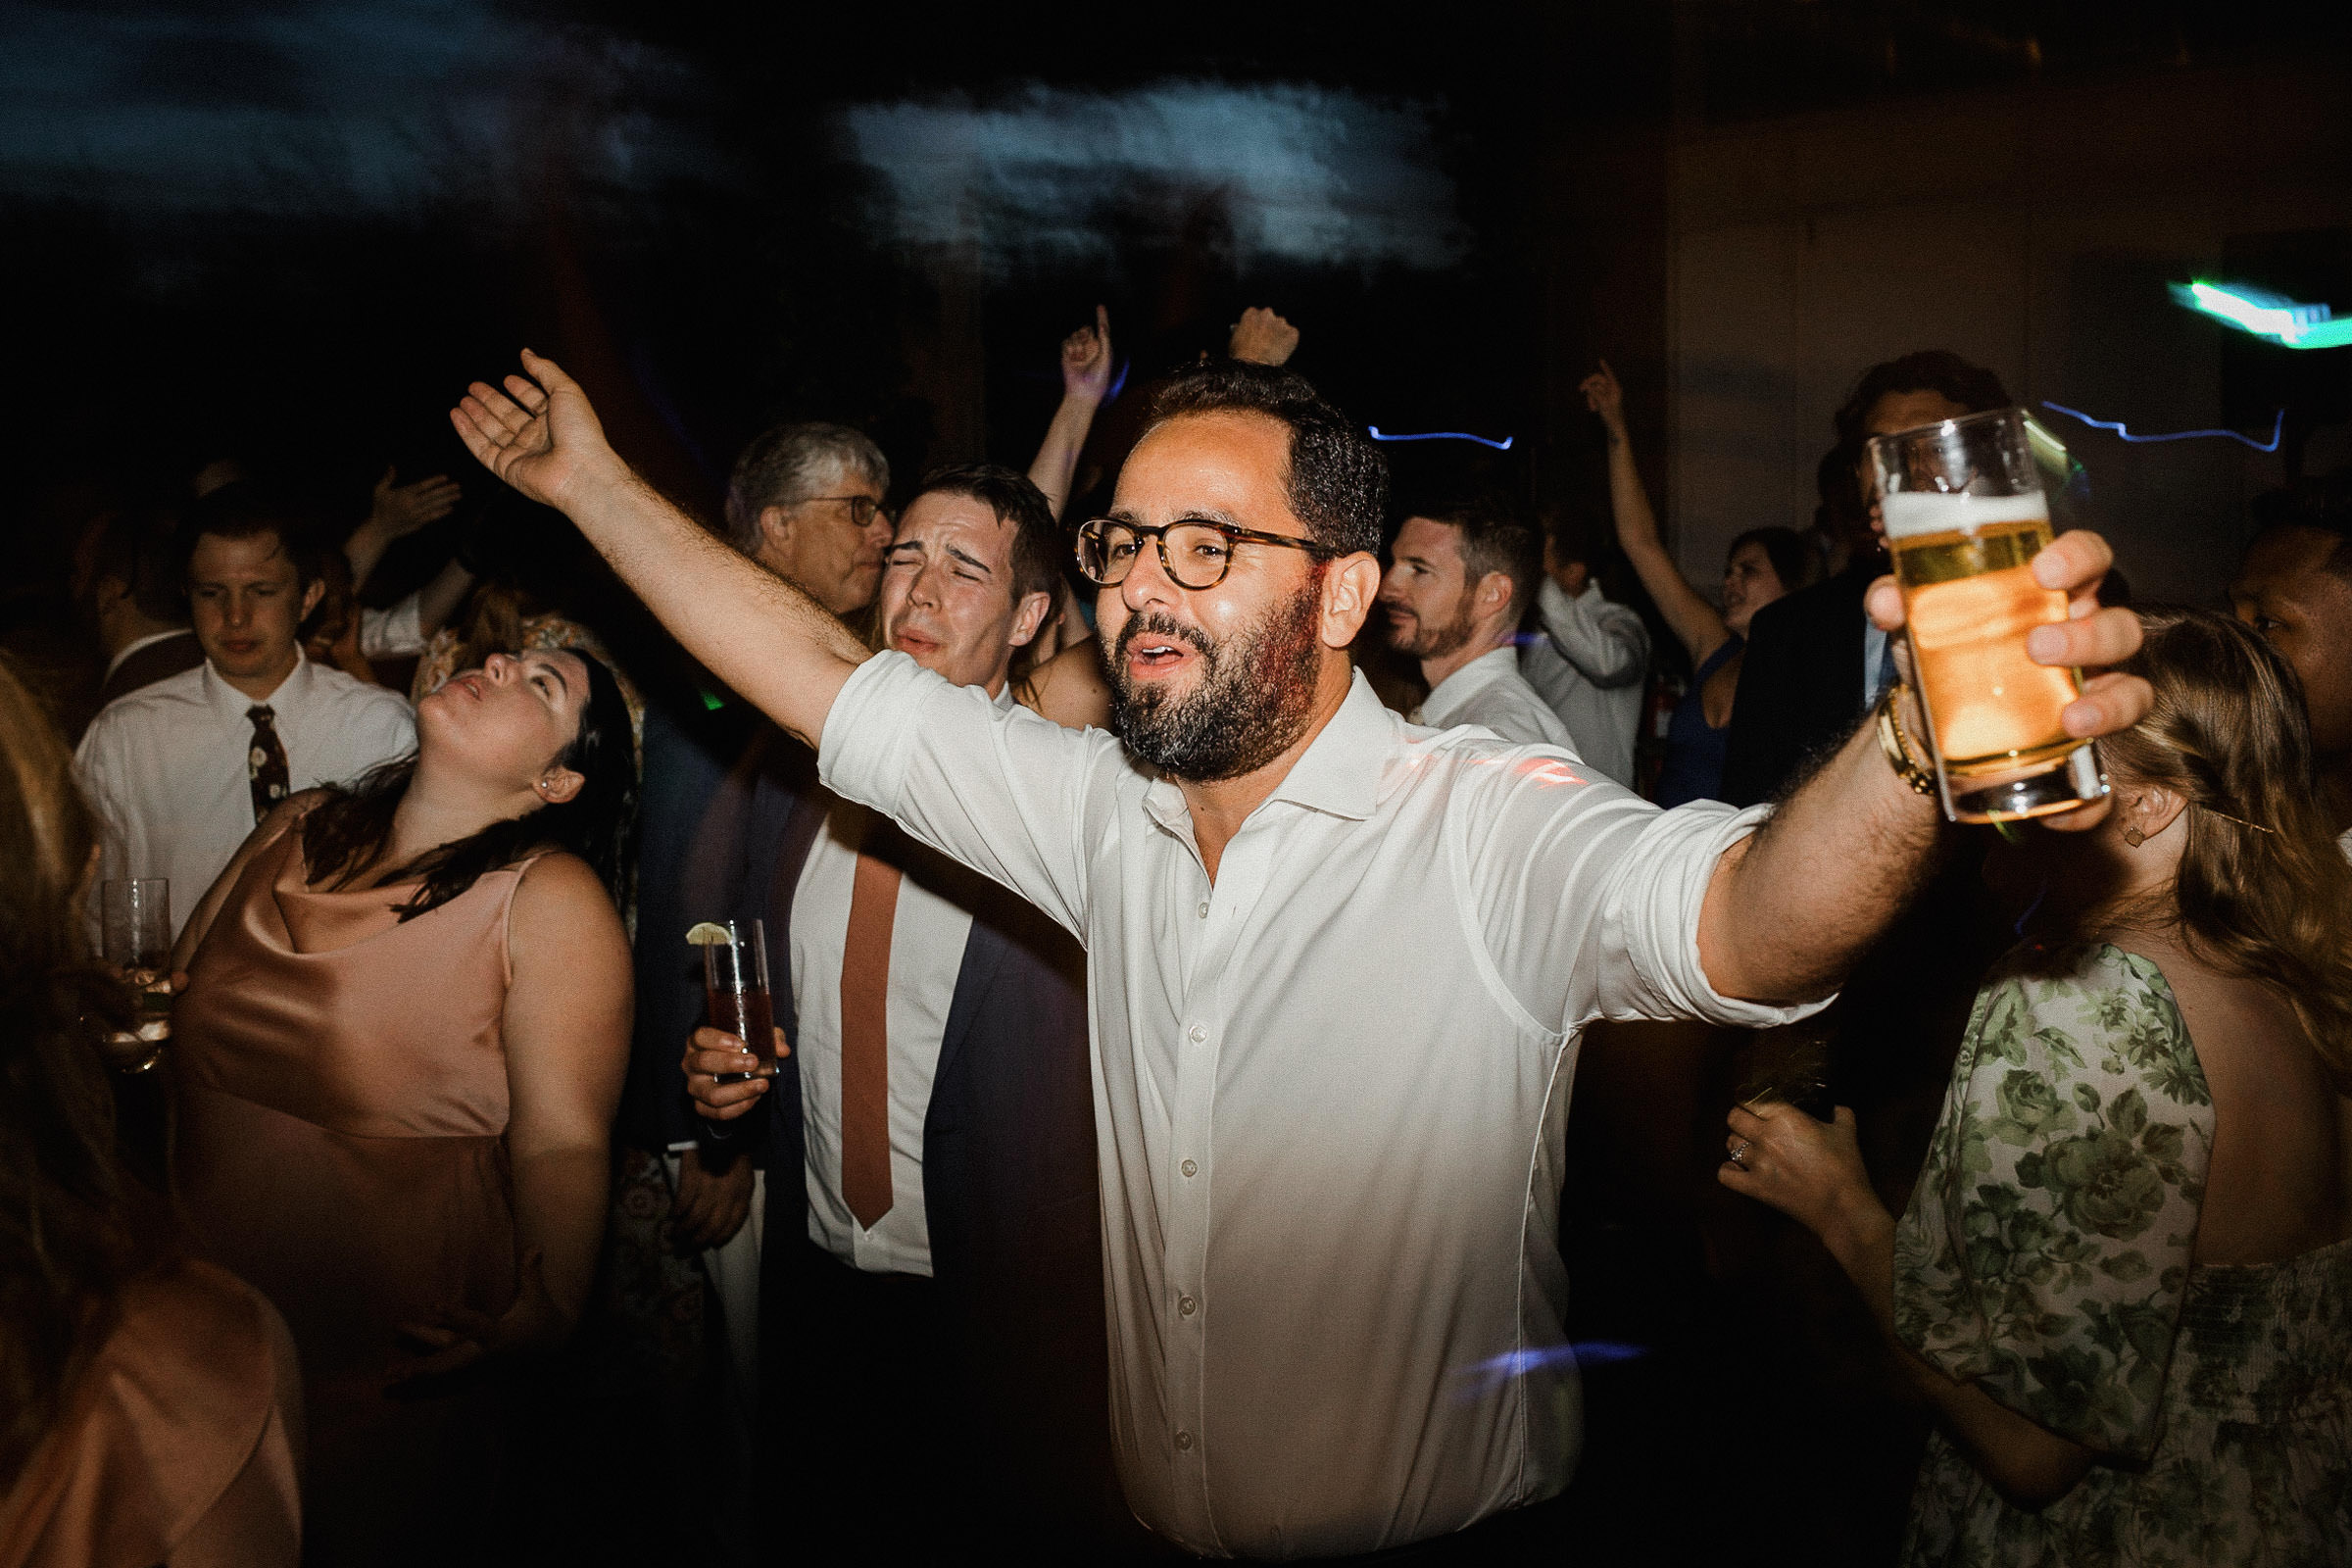 Guest extends his arms wide while singing along to a song on the dance floor